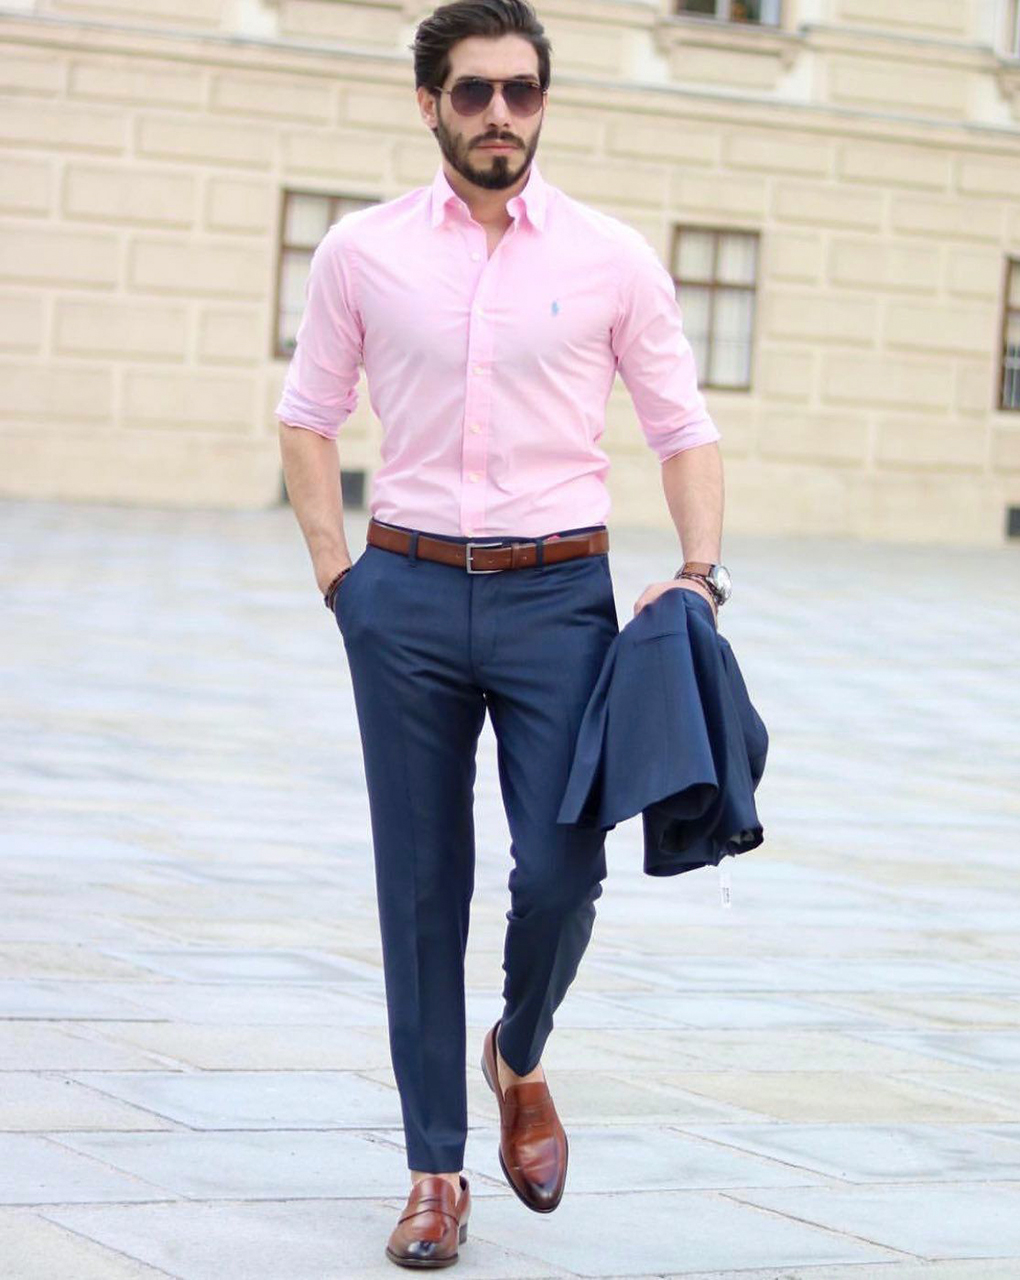 Pink shirt, navy pants, and brown loafers